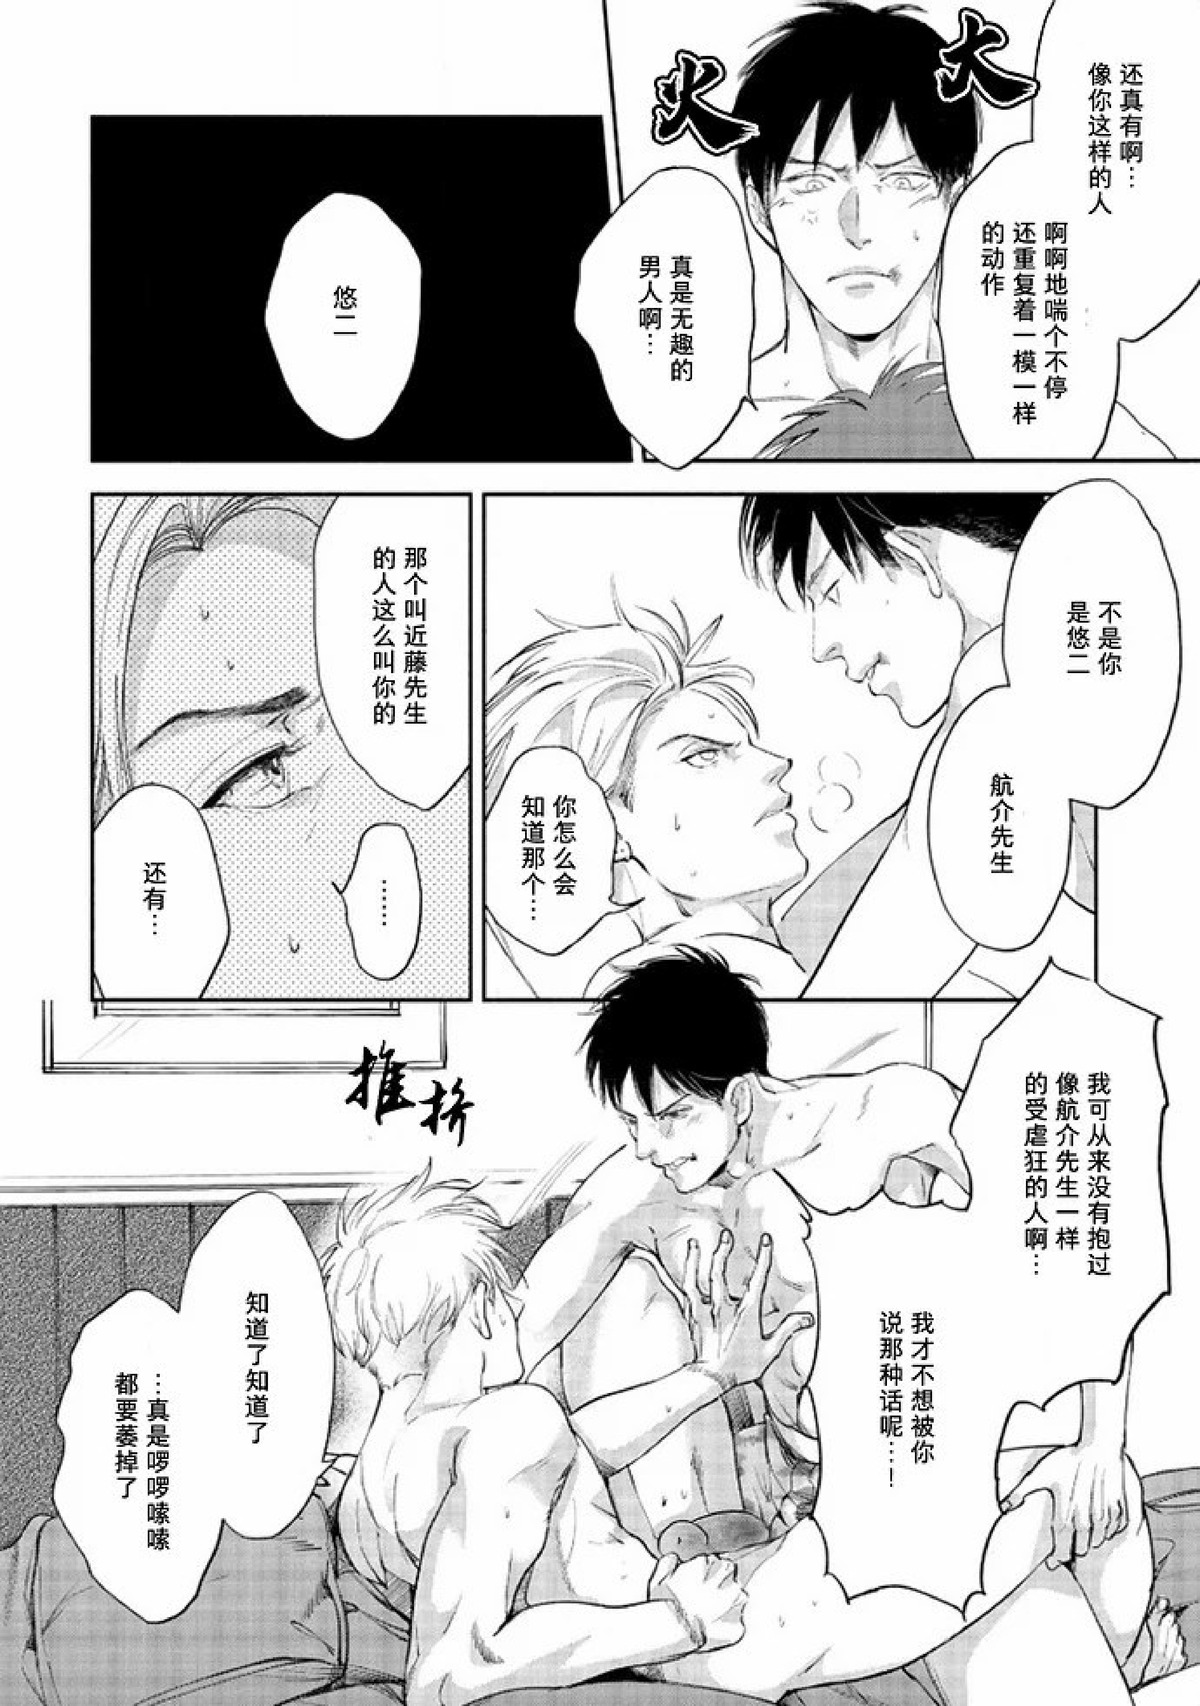 【Two sides of the same coin[耽美]】漫画-（上卷01-02）章节漫画下拉式图片-93.jpg